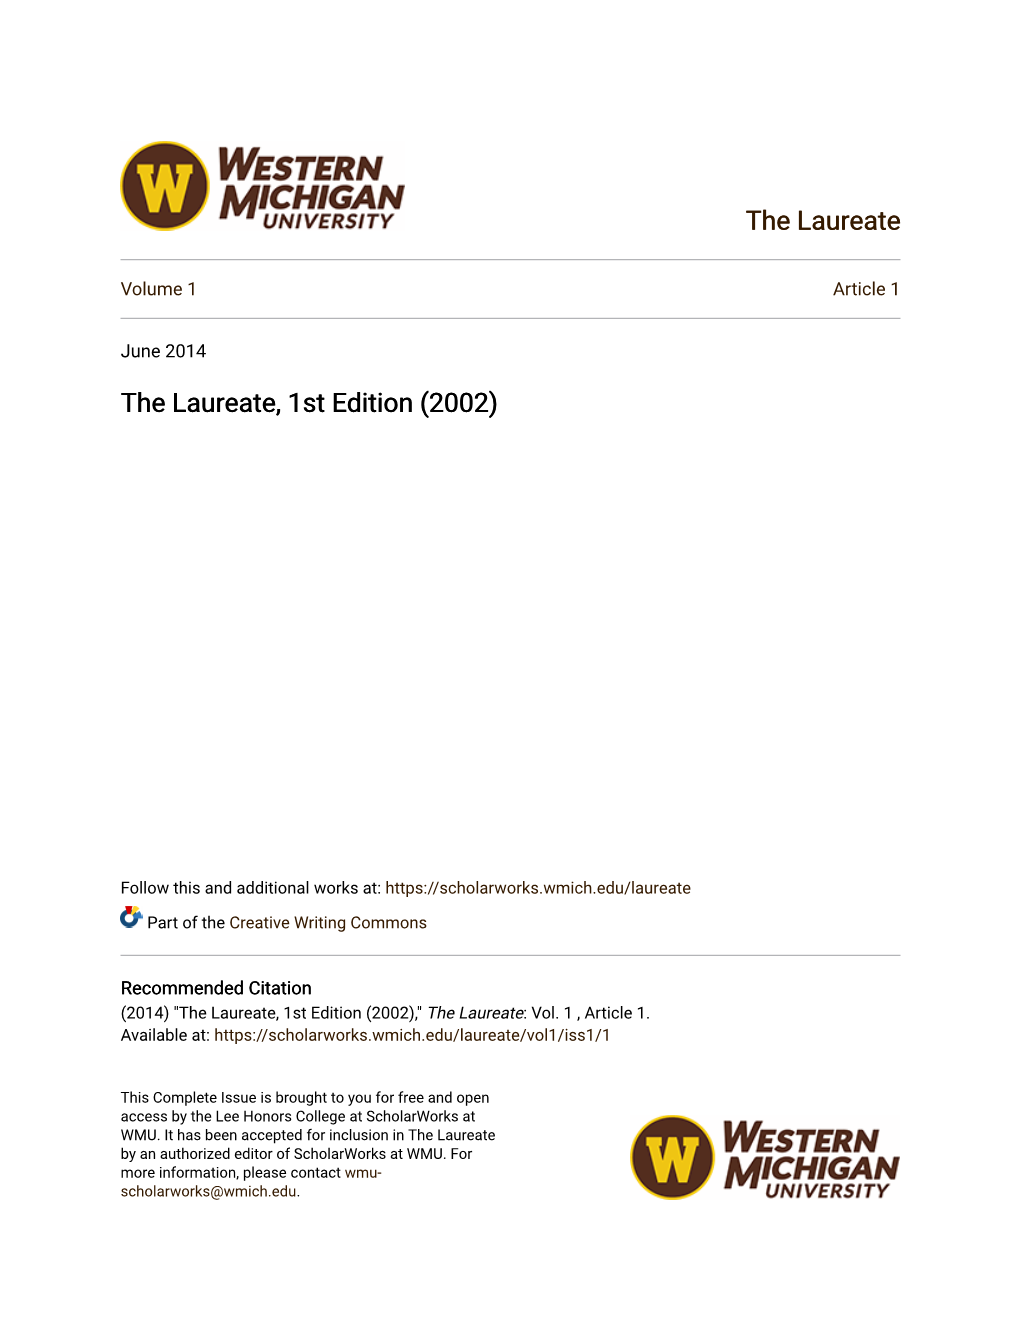 The Laureate, 1St Edition (2002)